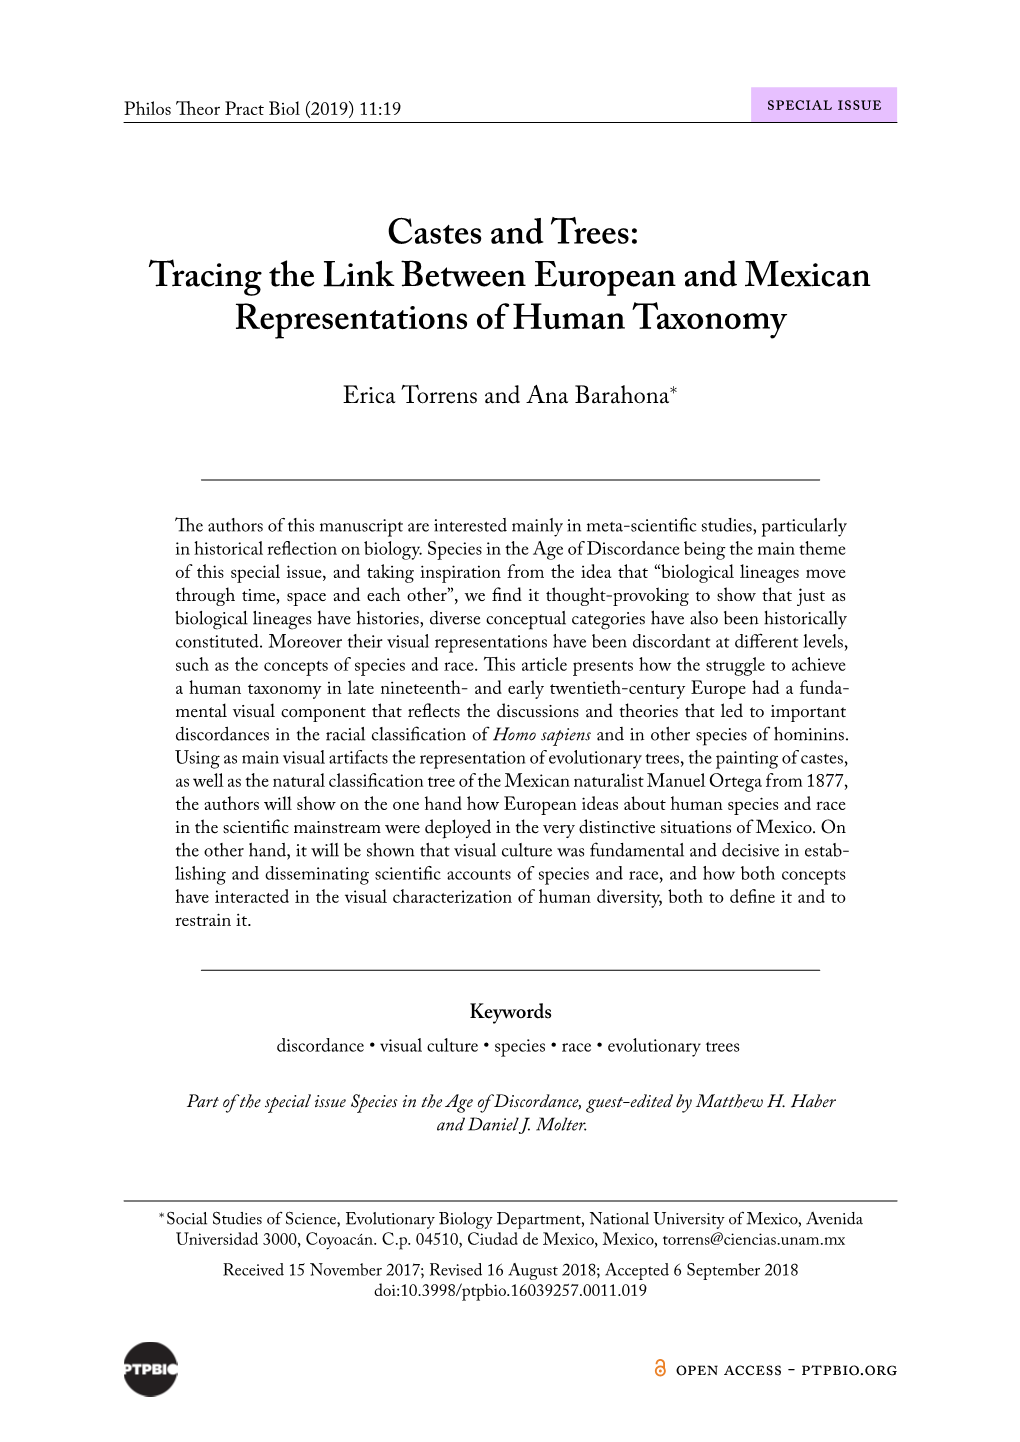 Castes and Trees: Tracing the Link Between European and Mexican Representations of Human Taxonomy